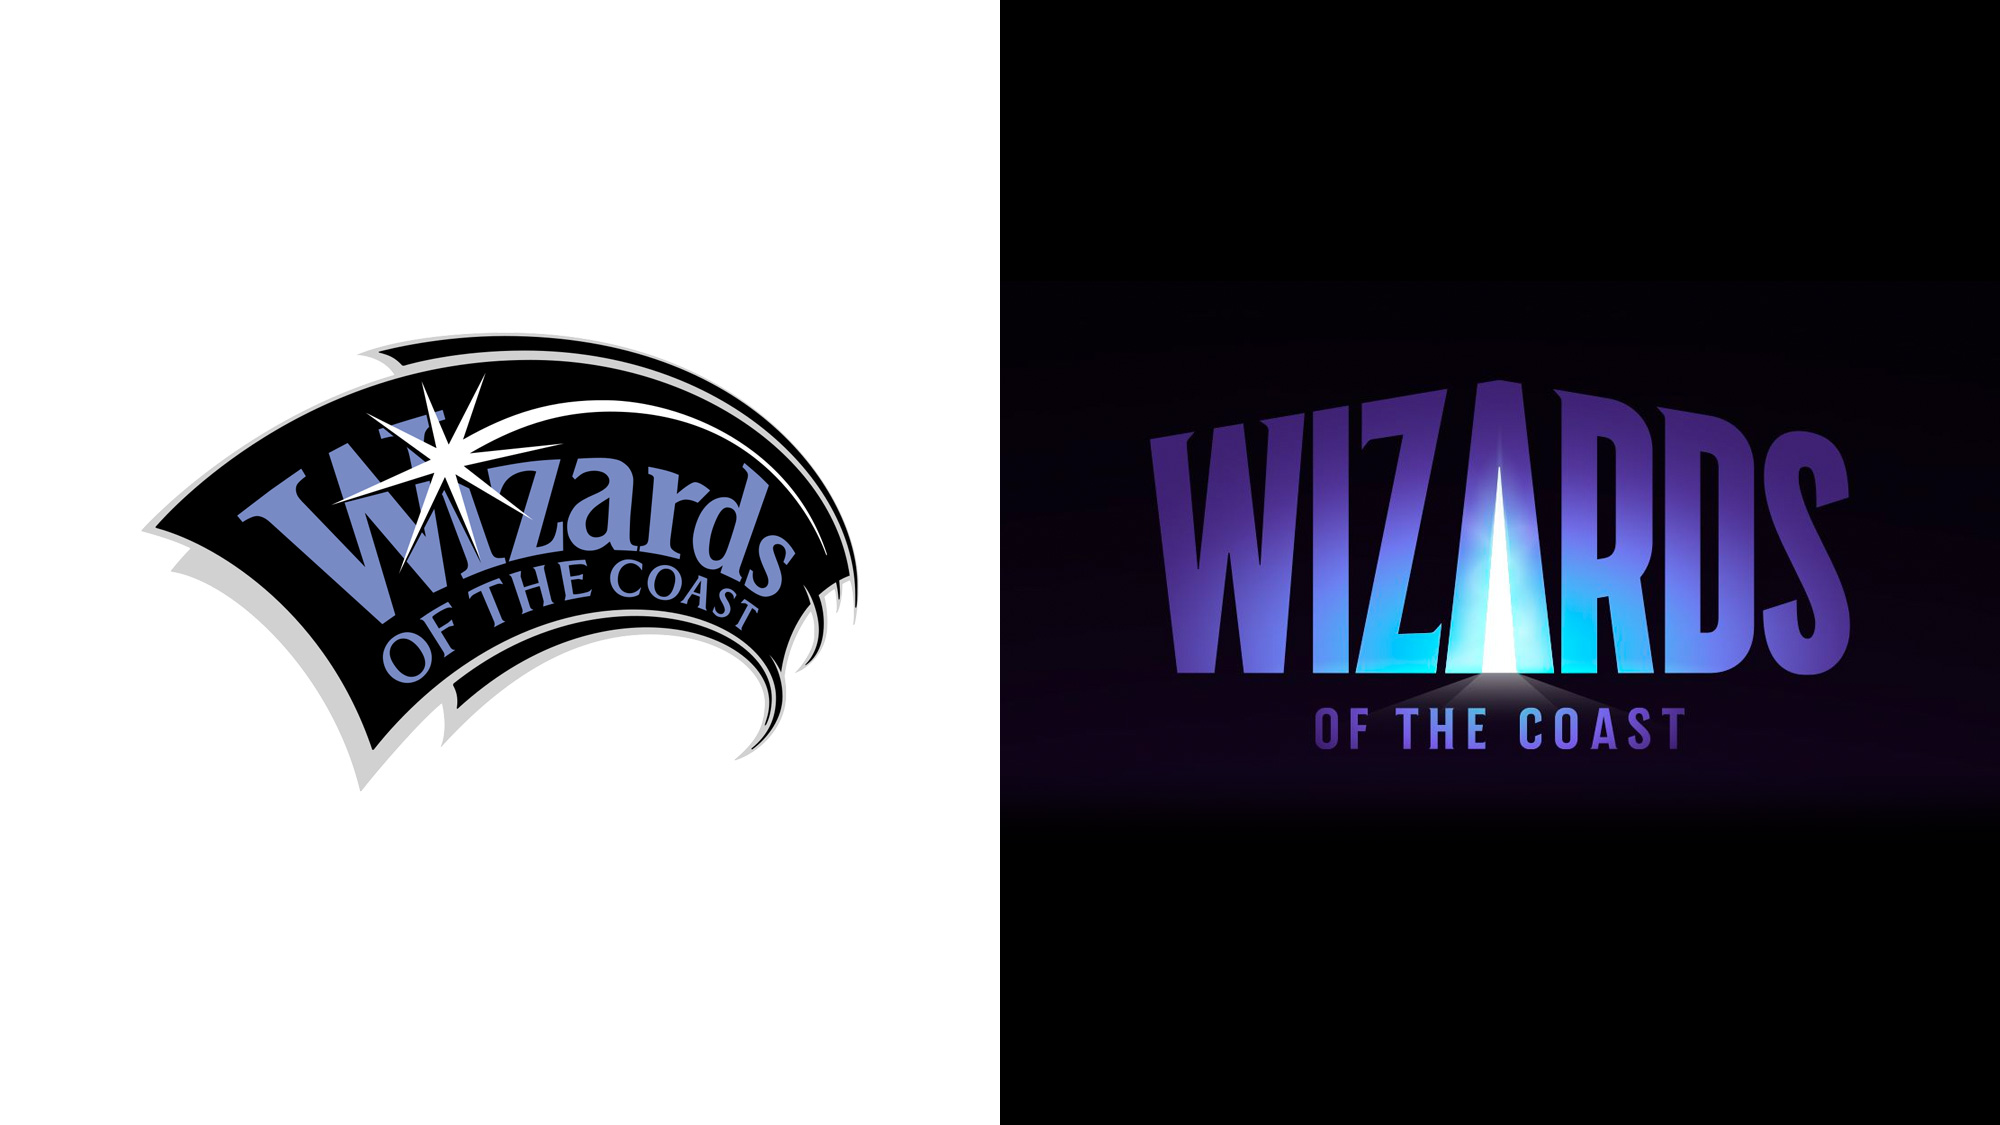 Brand New: New Logo for Wizards of the Coast